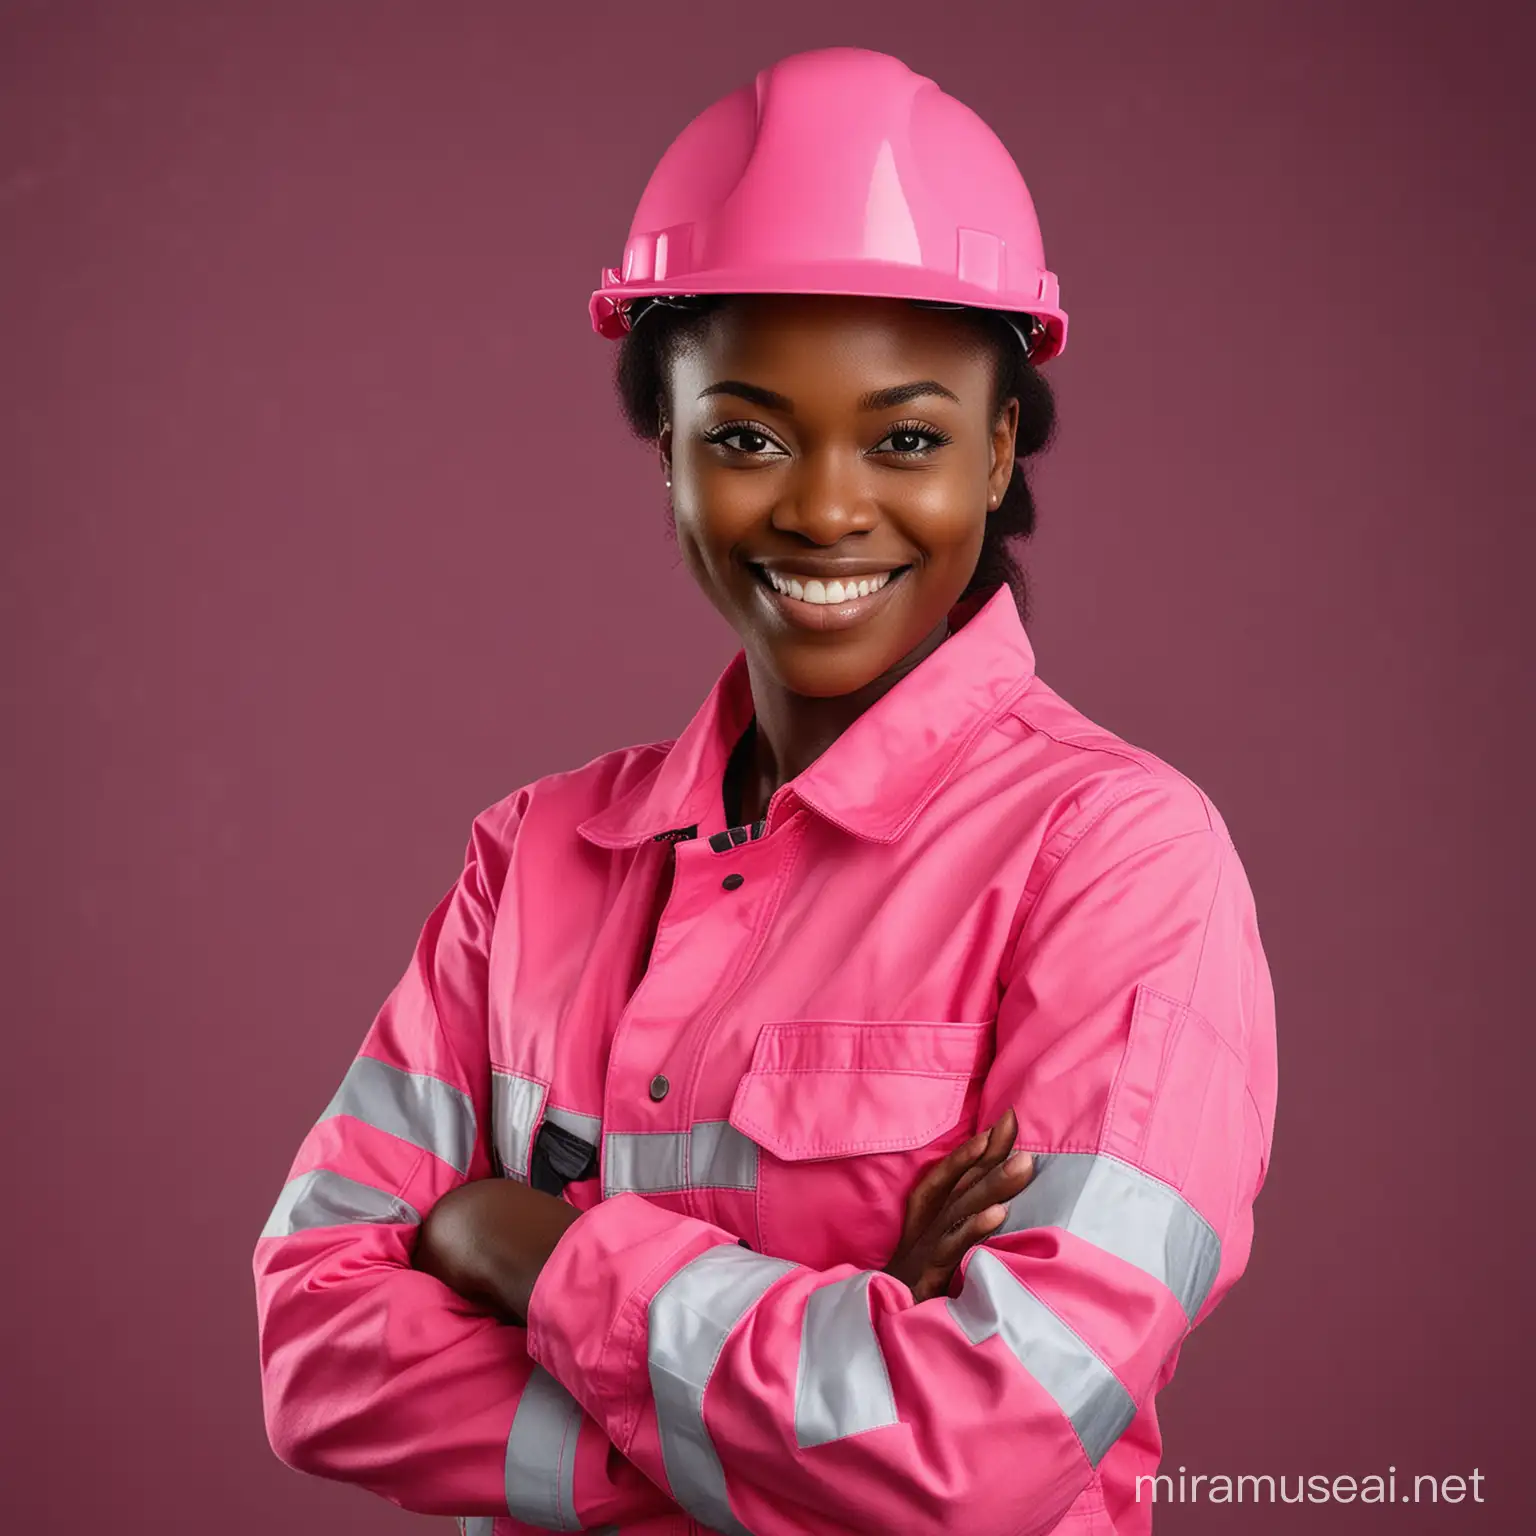 Young Nigerian Female Construction Worker Smiling in Pink Safety Gear